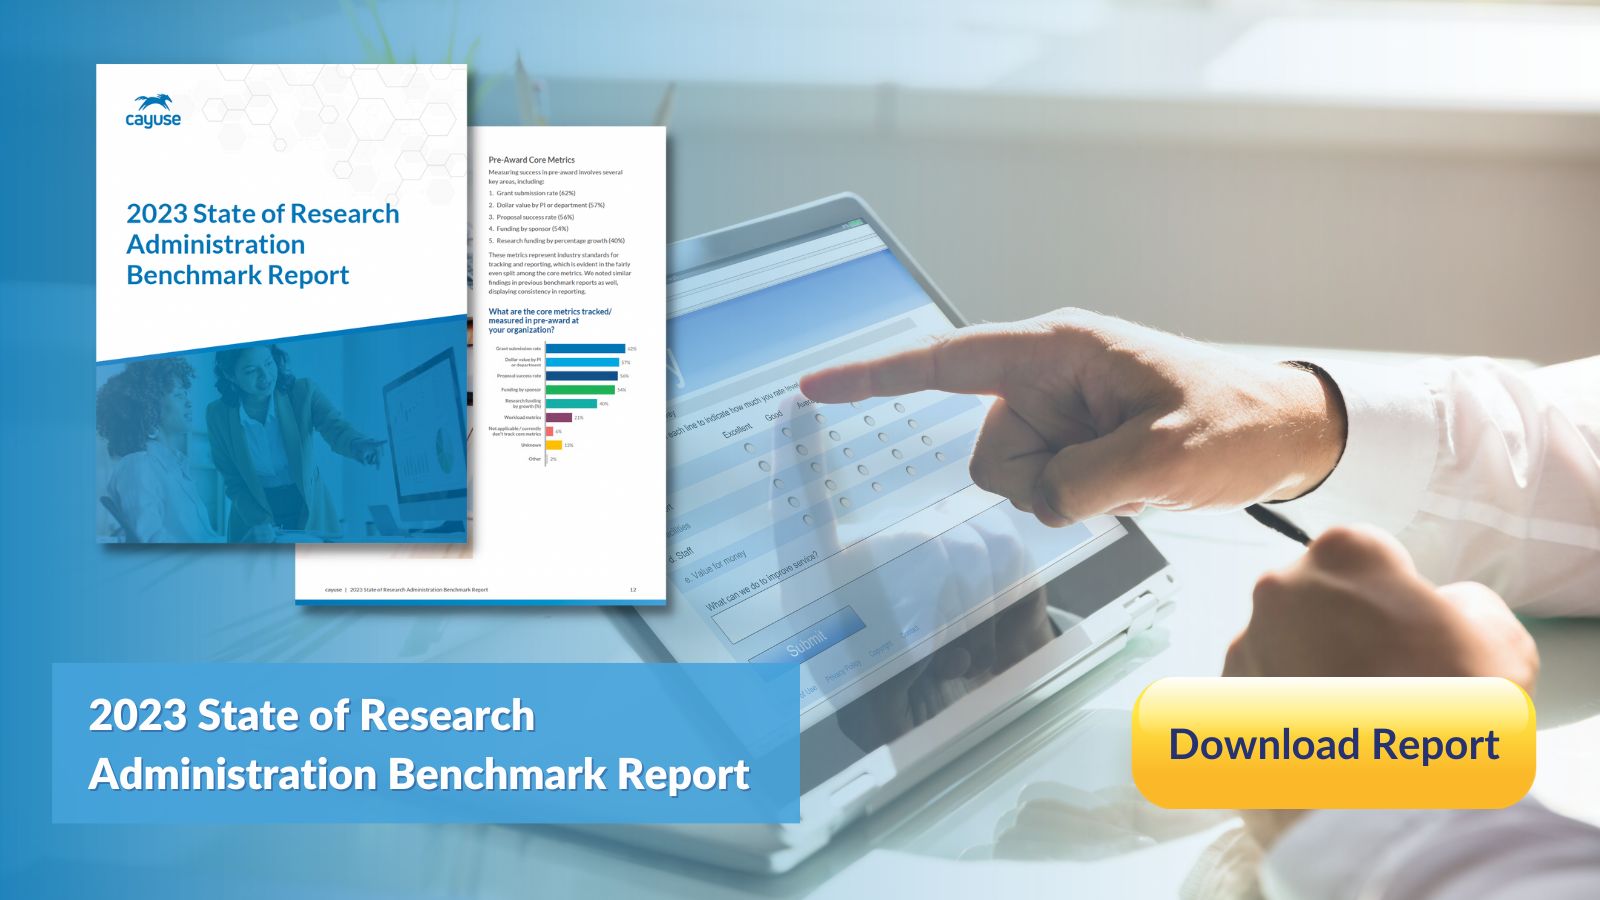 2022 State of Research Administration Benchmark Report